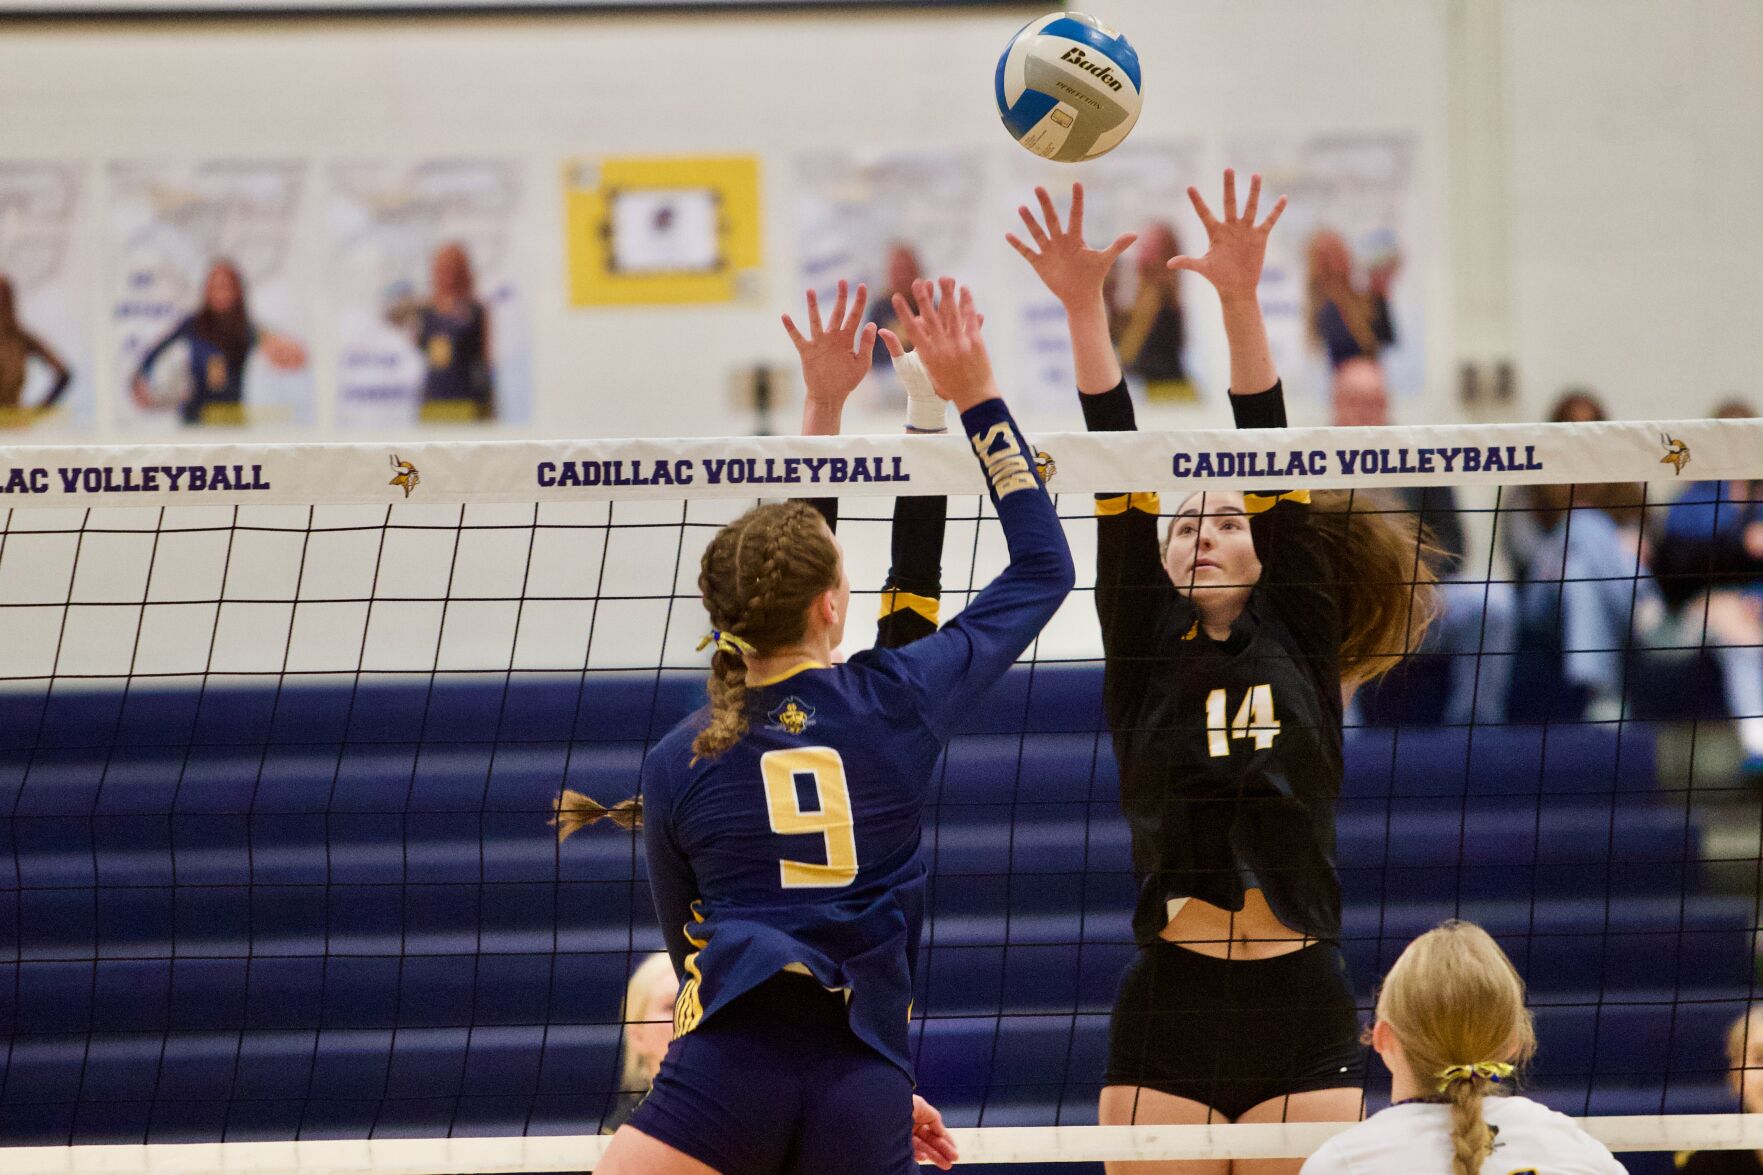 Traverse City Central Trojans put up a tough fight against Grand Haven Buccaneers in Division 1 volleyball regional semifinal